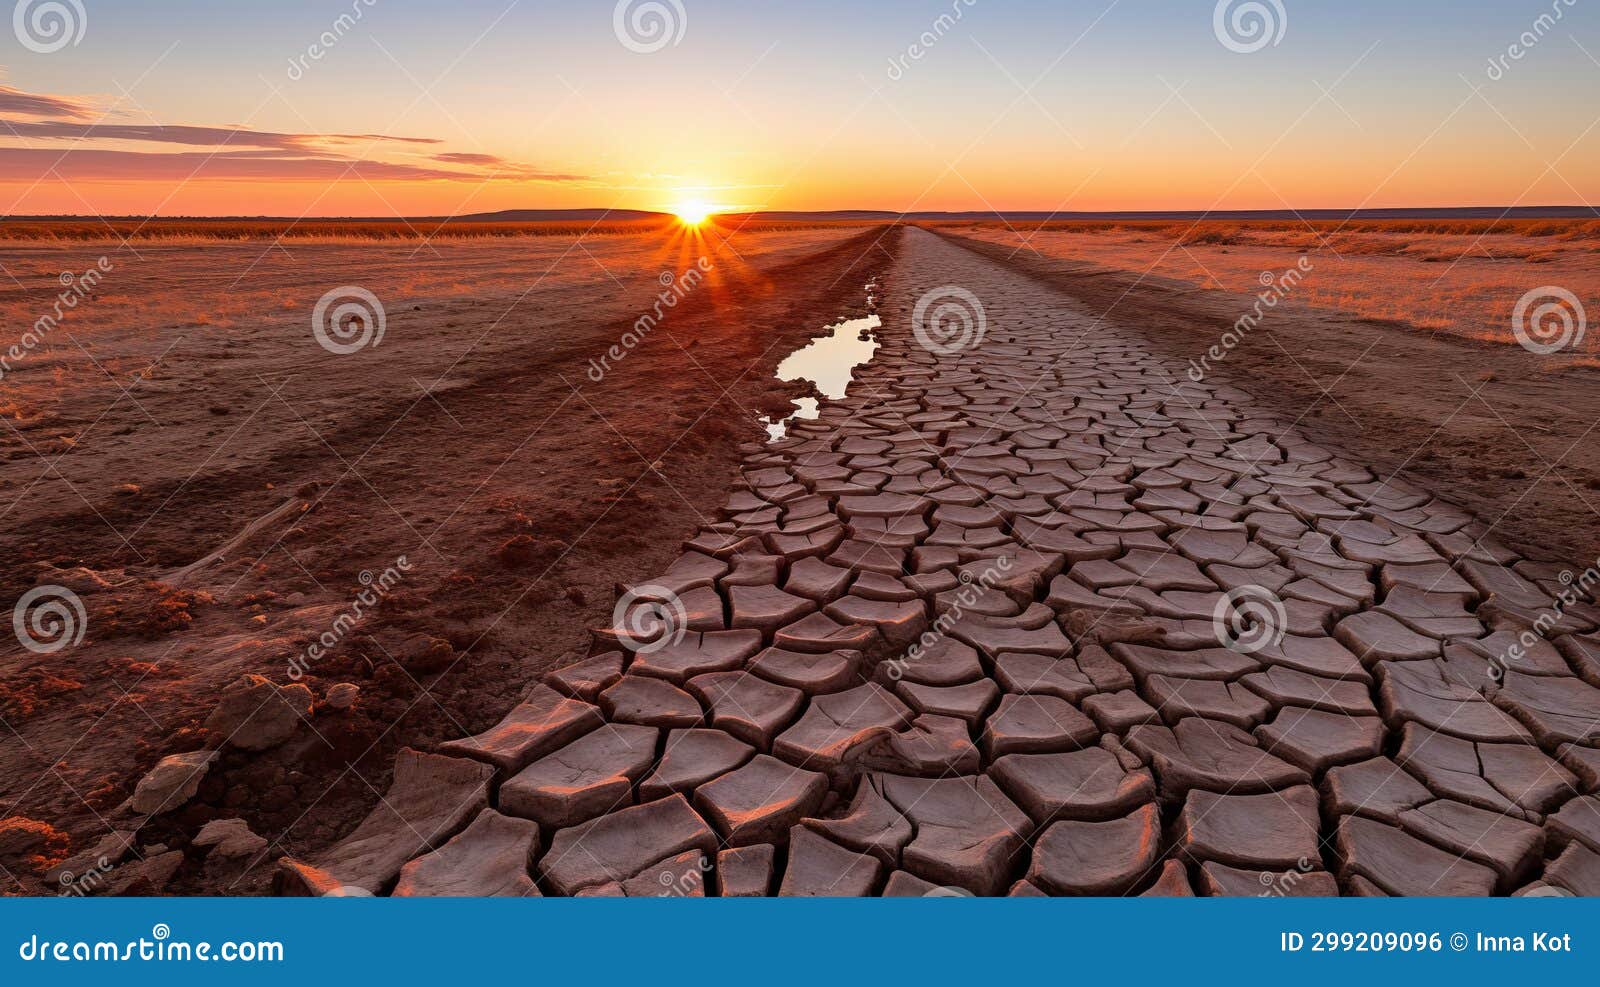 the devastating effects of climate change. the ever-increasing aridity of our earth.